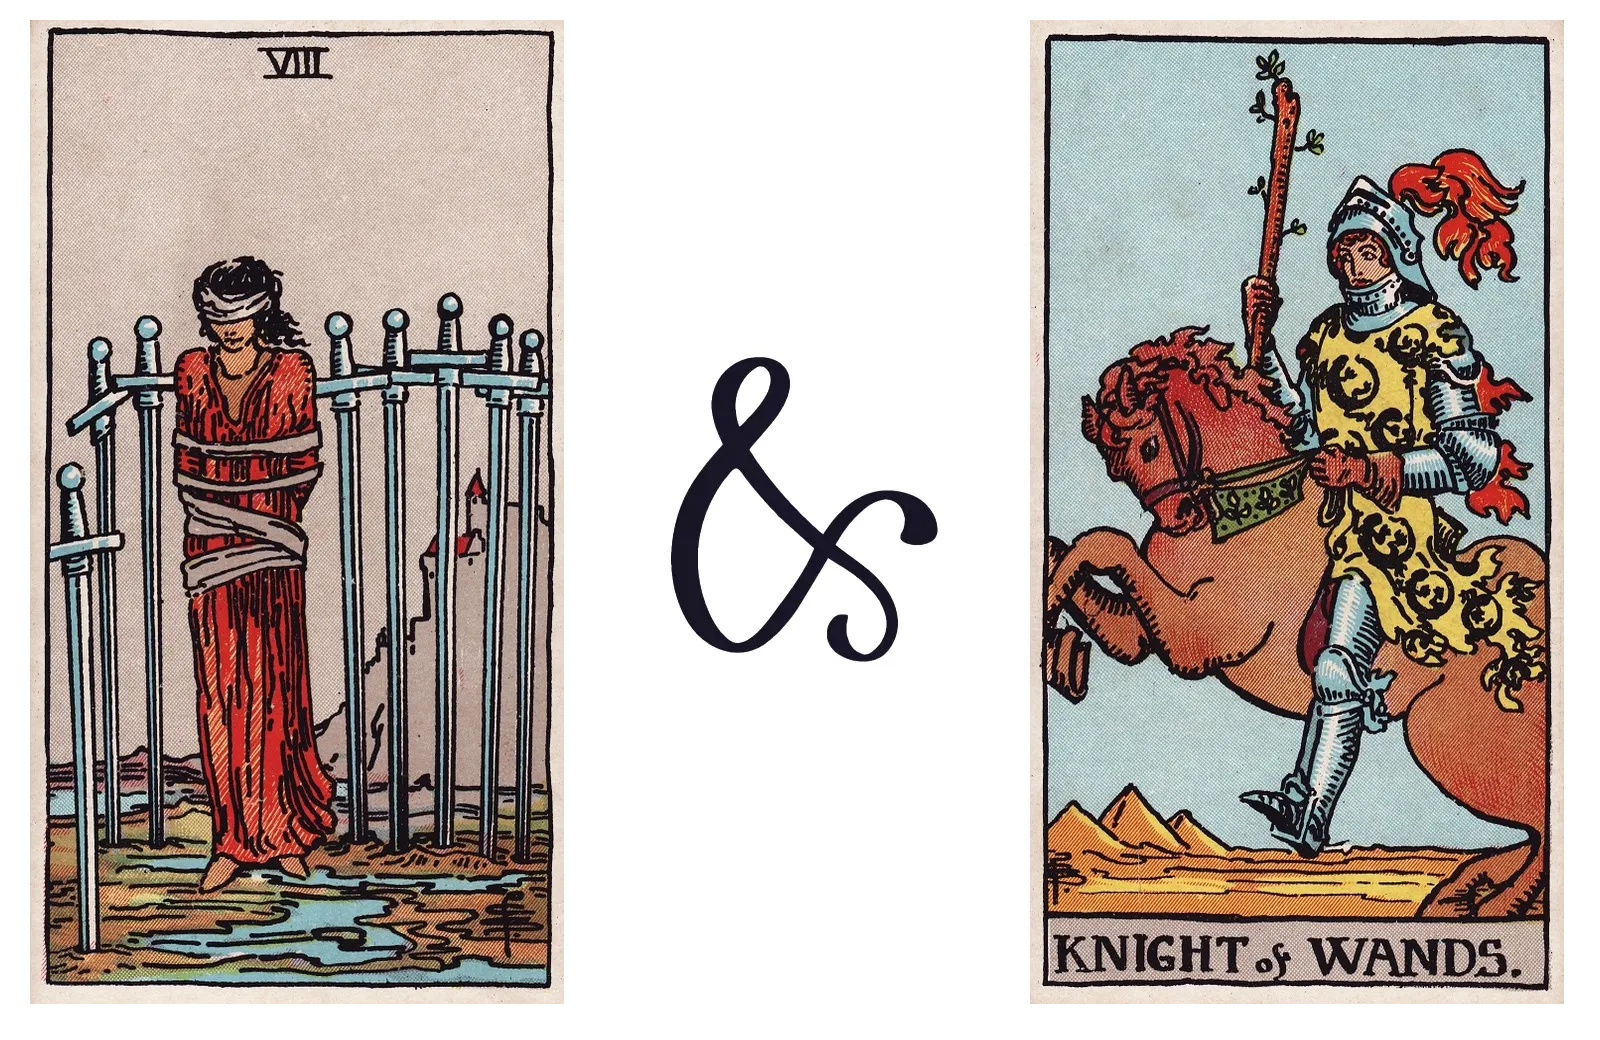 Eight of Swords and Knight of Wands